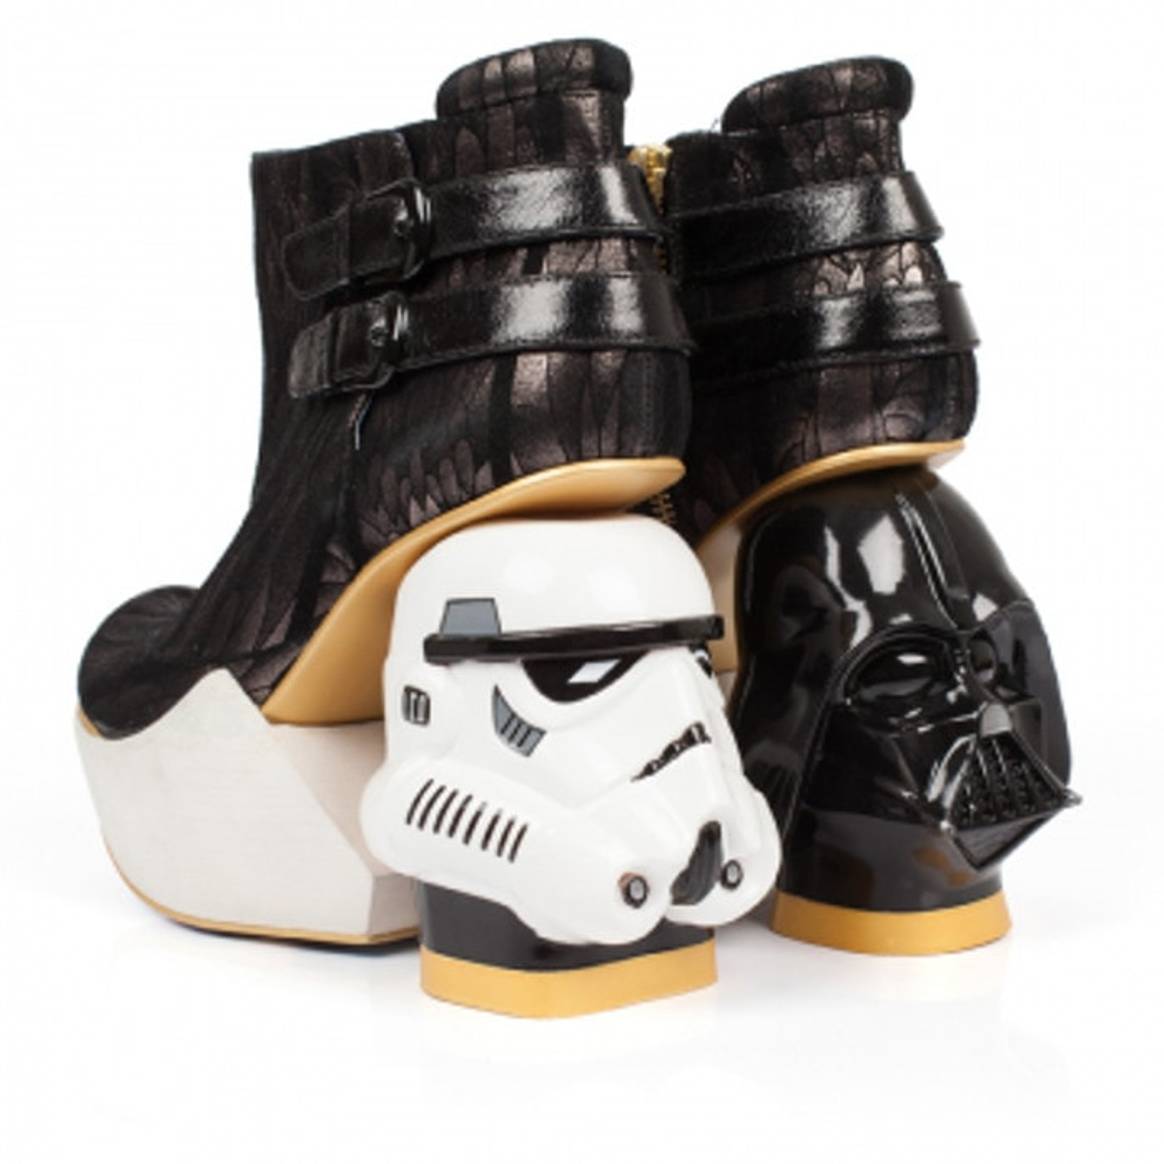 In Picture: Star Wars Fashion